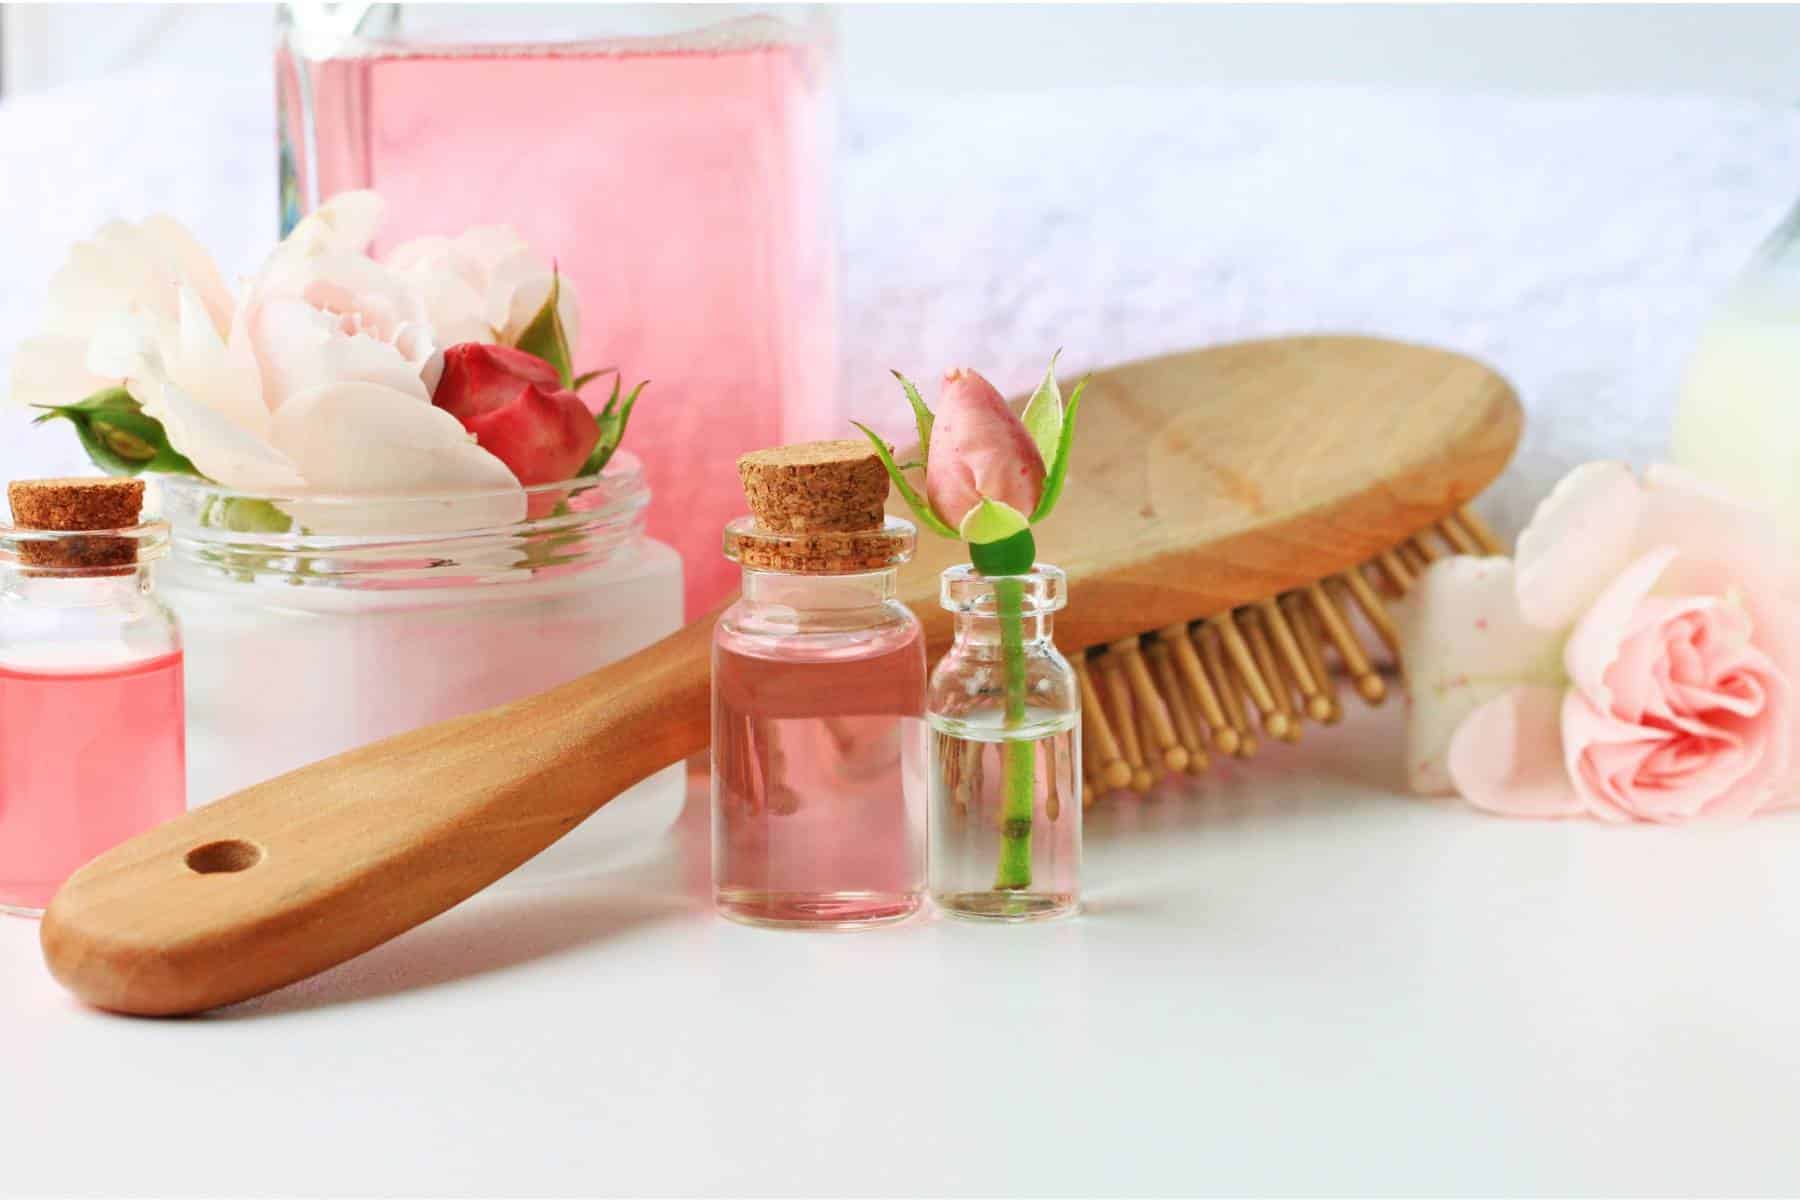 Rose water botanical hair products treatment, vials jars comb towel tonic home spa setting